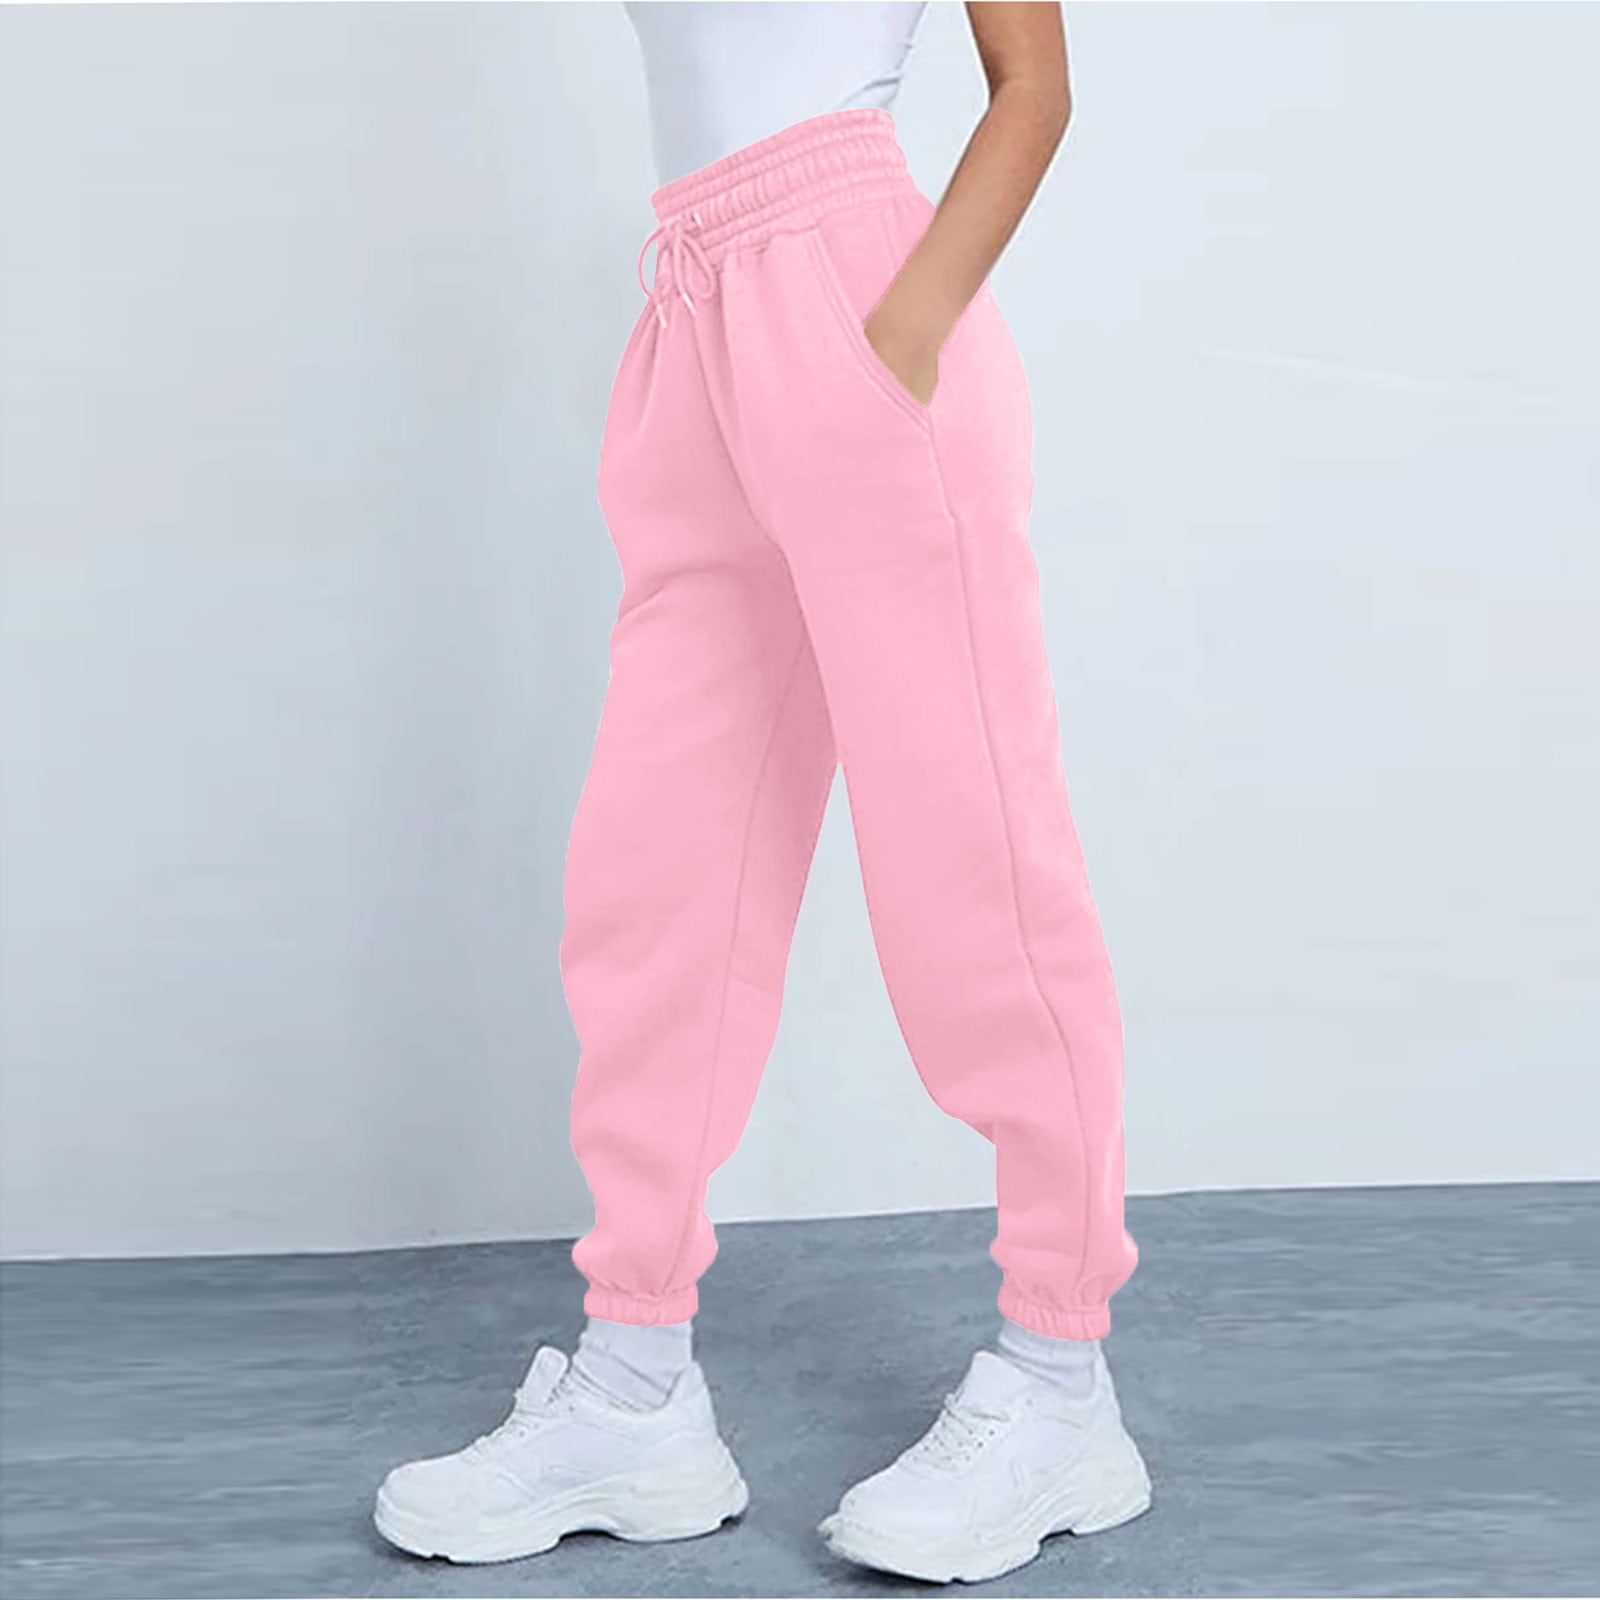 Buy HAUTE CURRY Pink Full Length Cotton Woven Women's Pants | Shoppers Stop